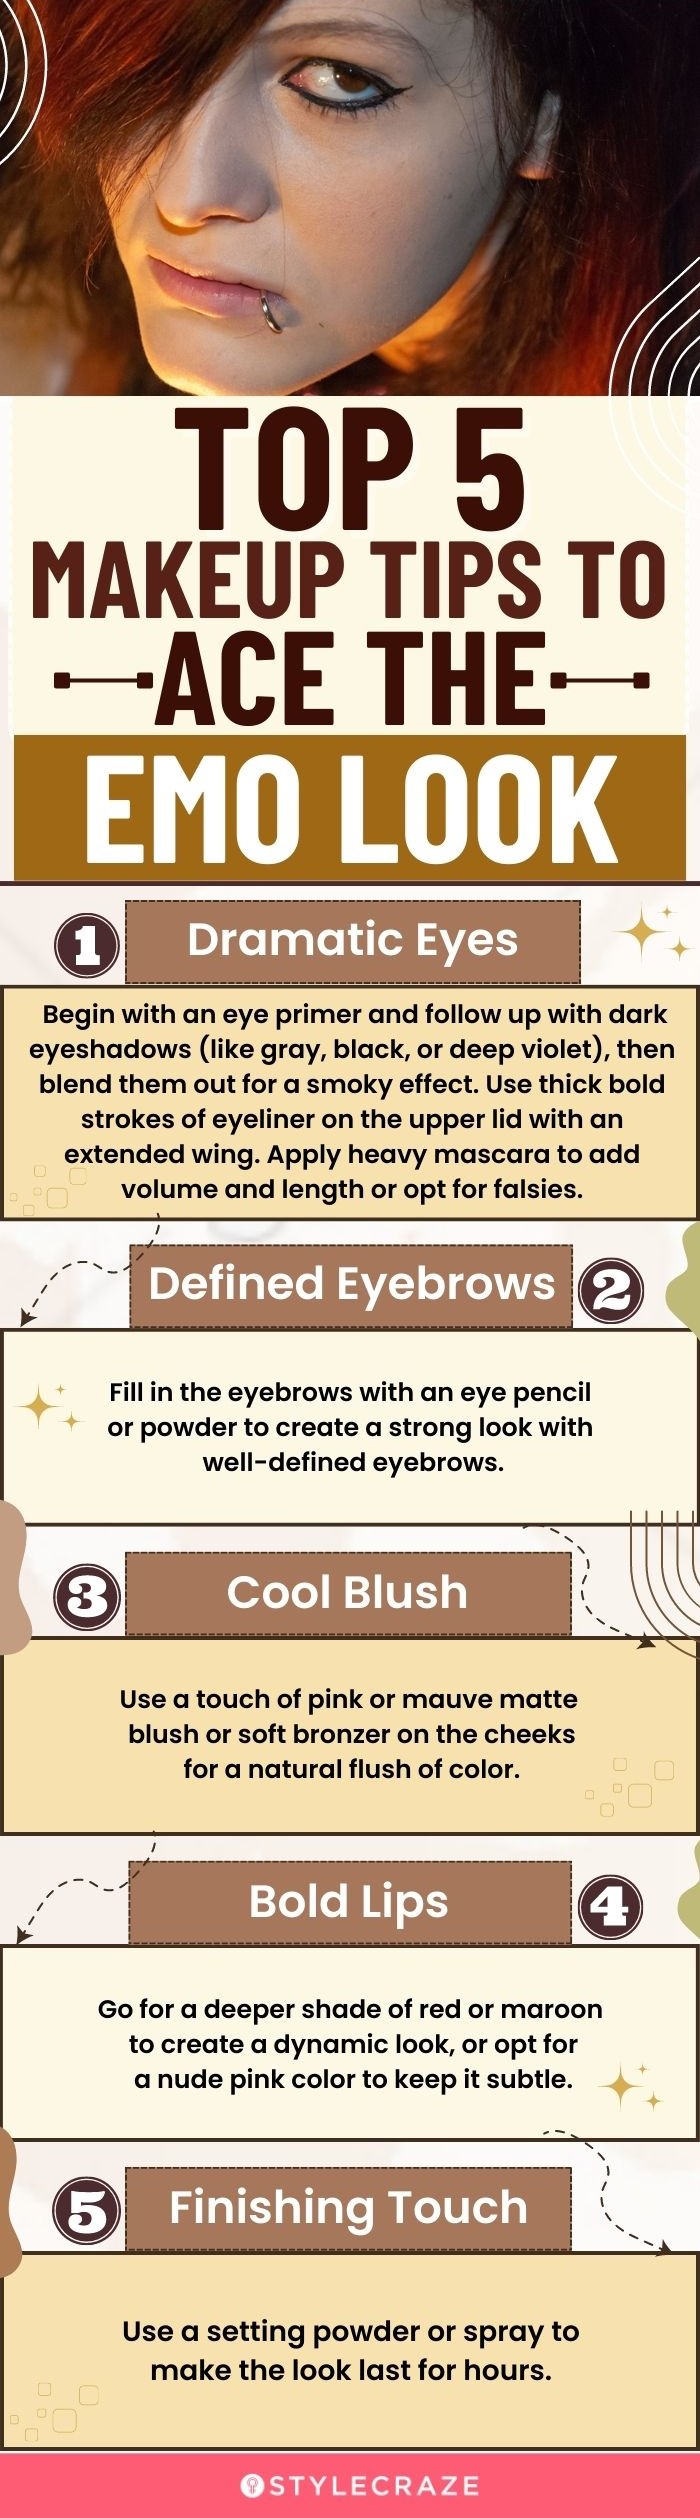 top 5 makeup tips to ace the emo look (infographic)